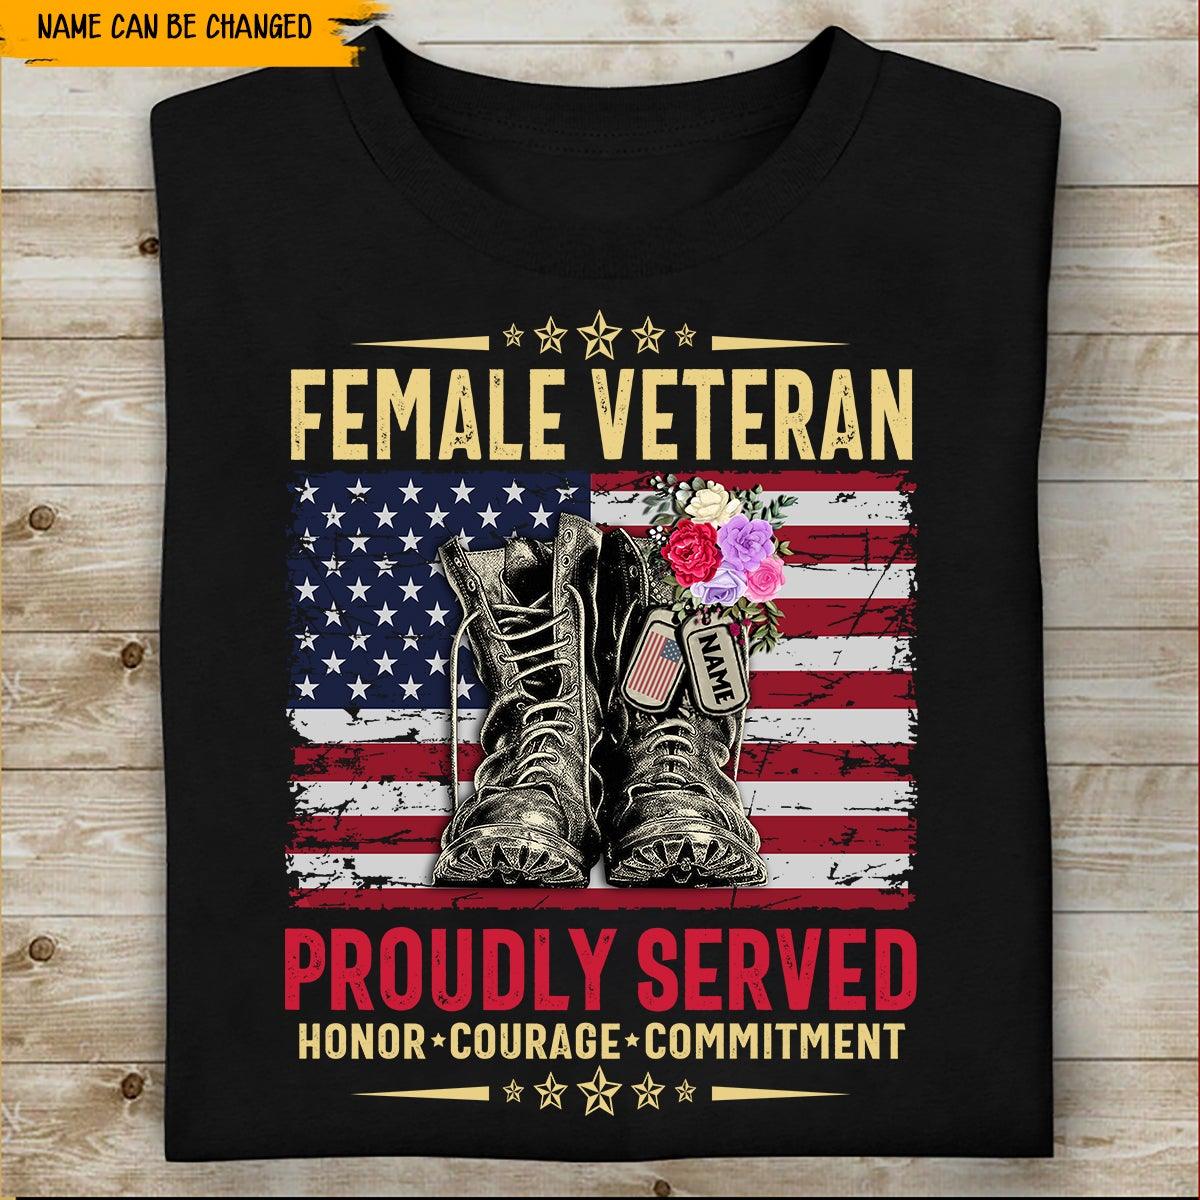 Veteran Day Custom Shirt Female Veteran Proudly Served Personalized Gift - PERSONAL84